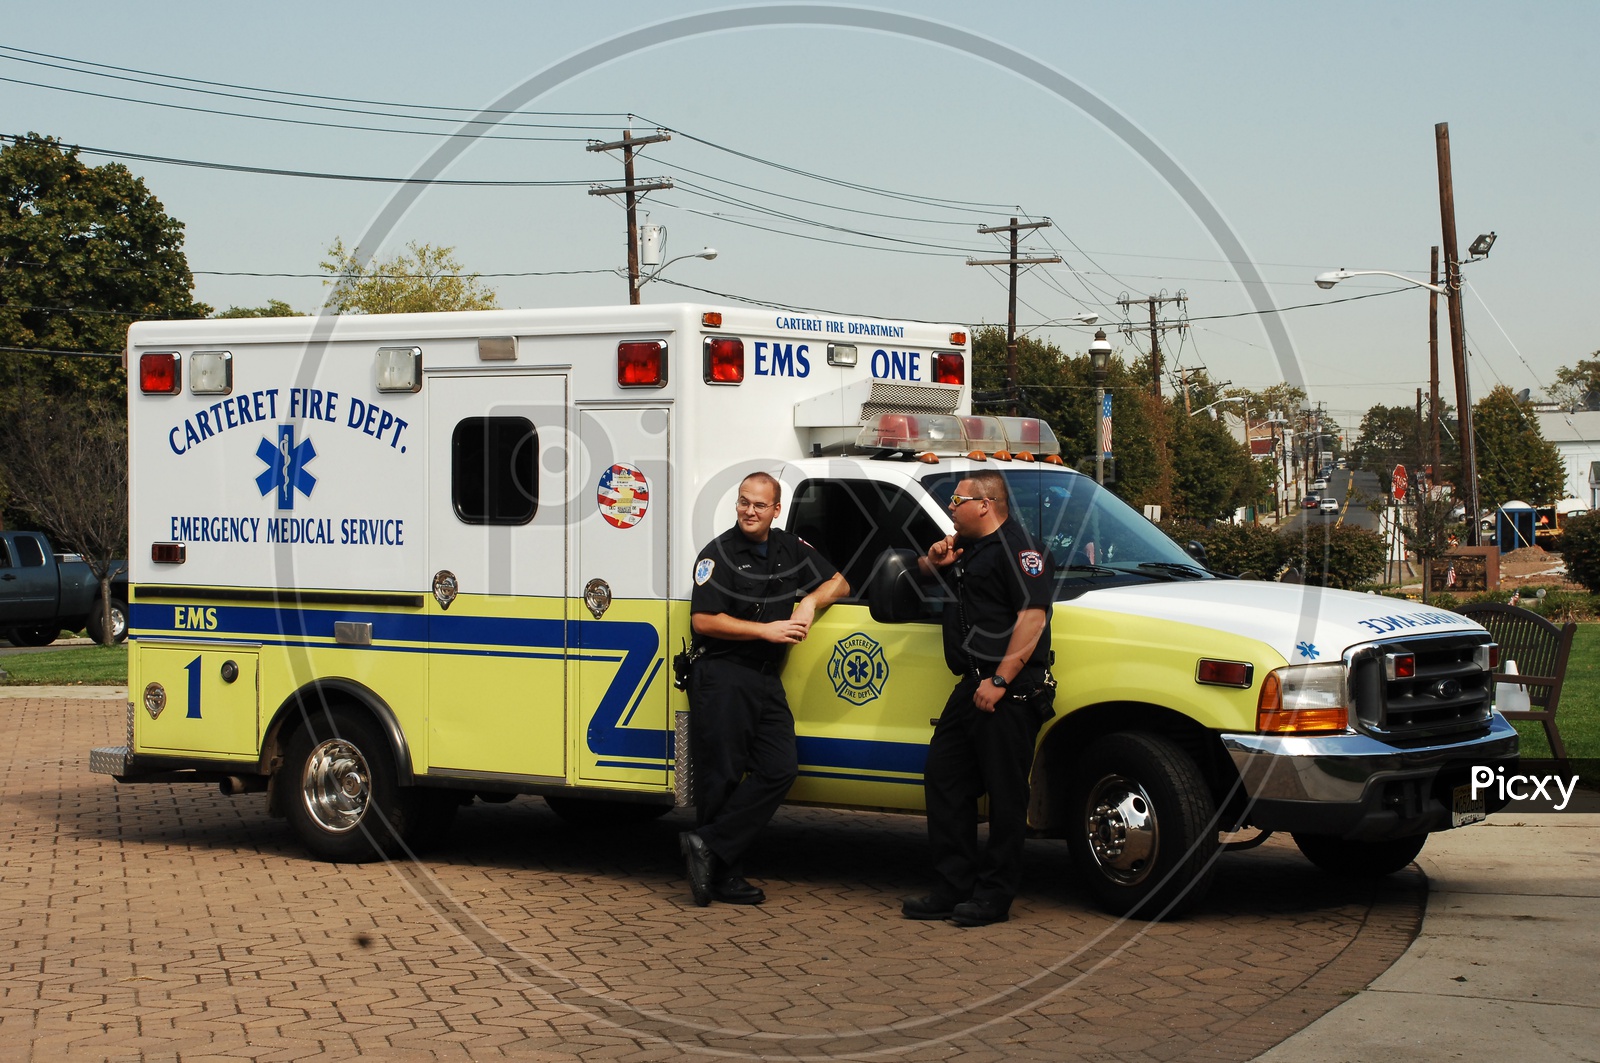 Security Guards standing at the ambulance